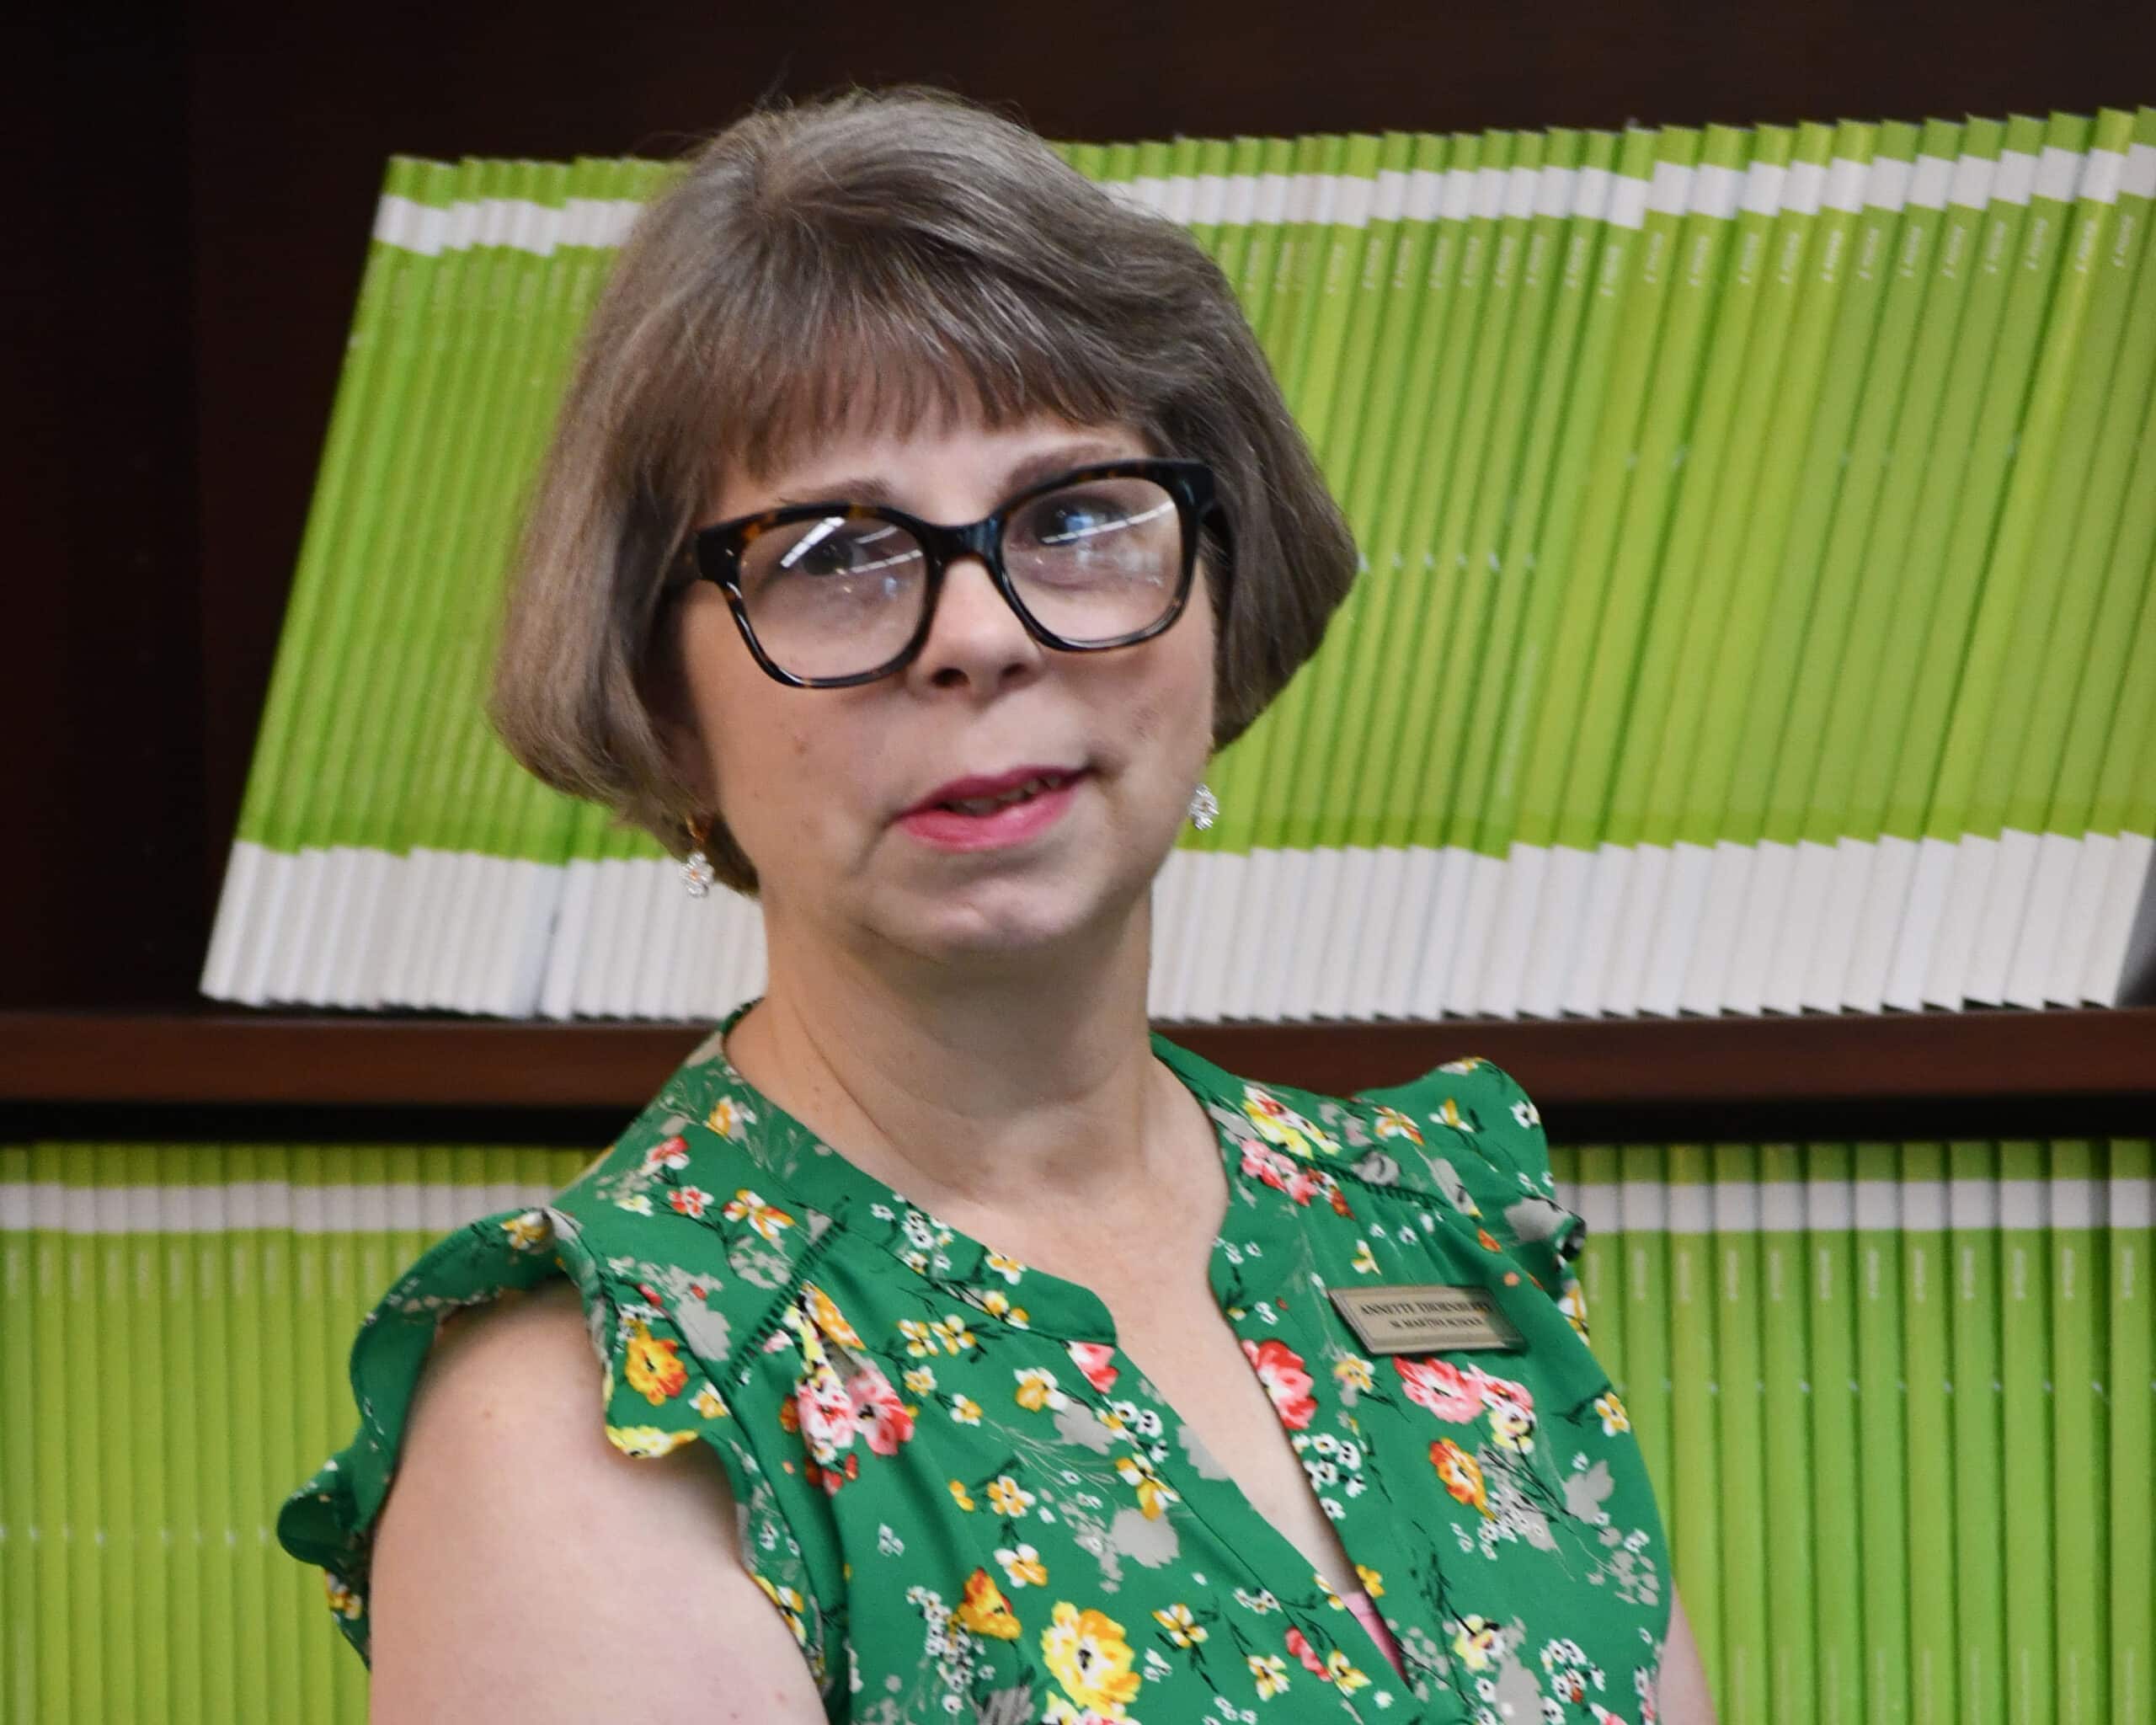 A woman in glasses standing in front of a green book shelf.